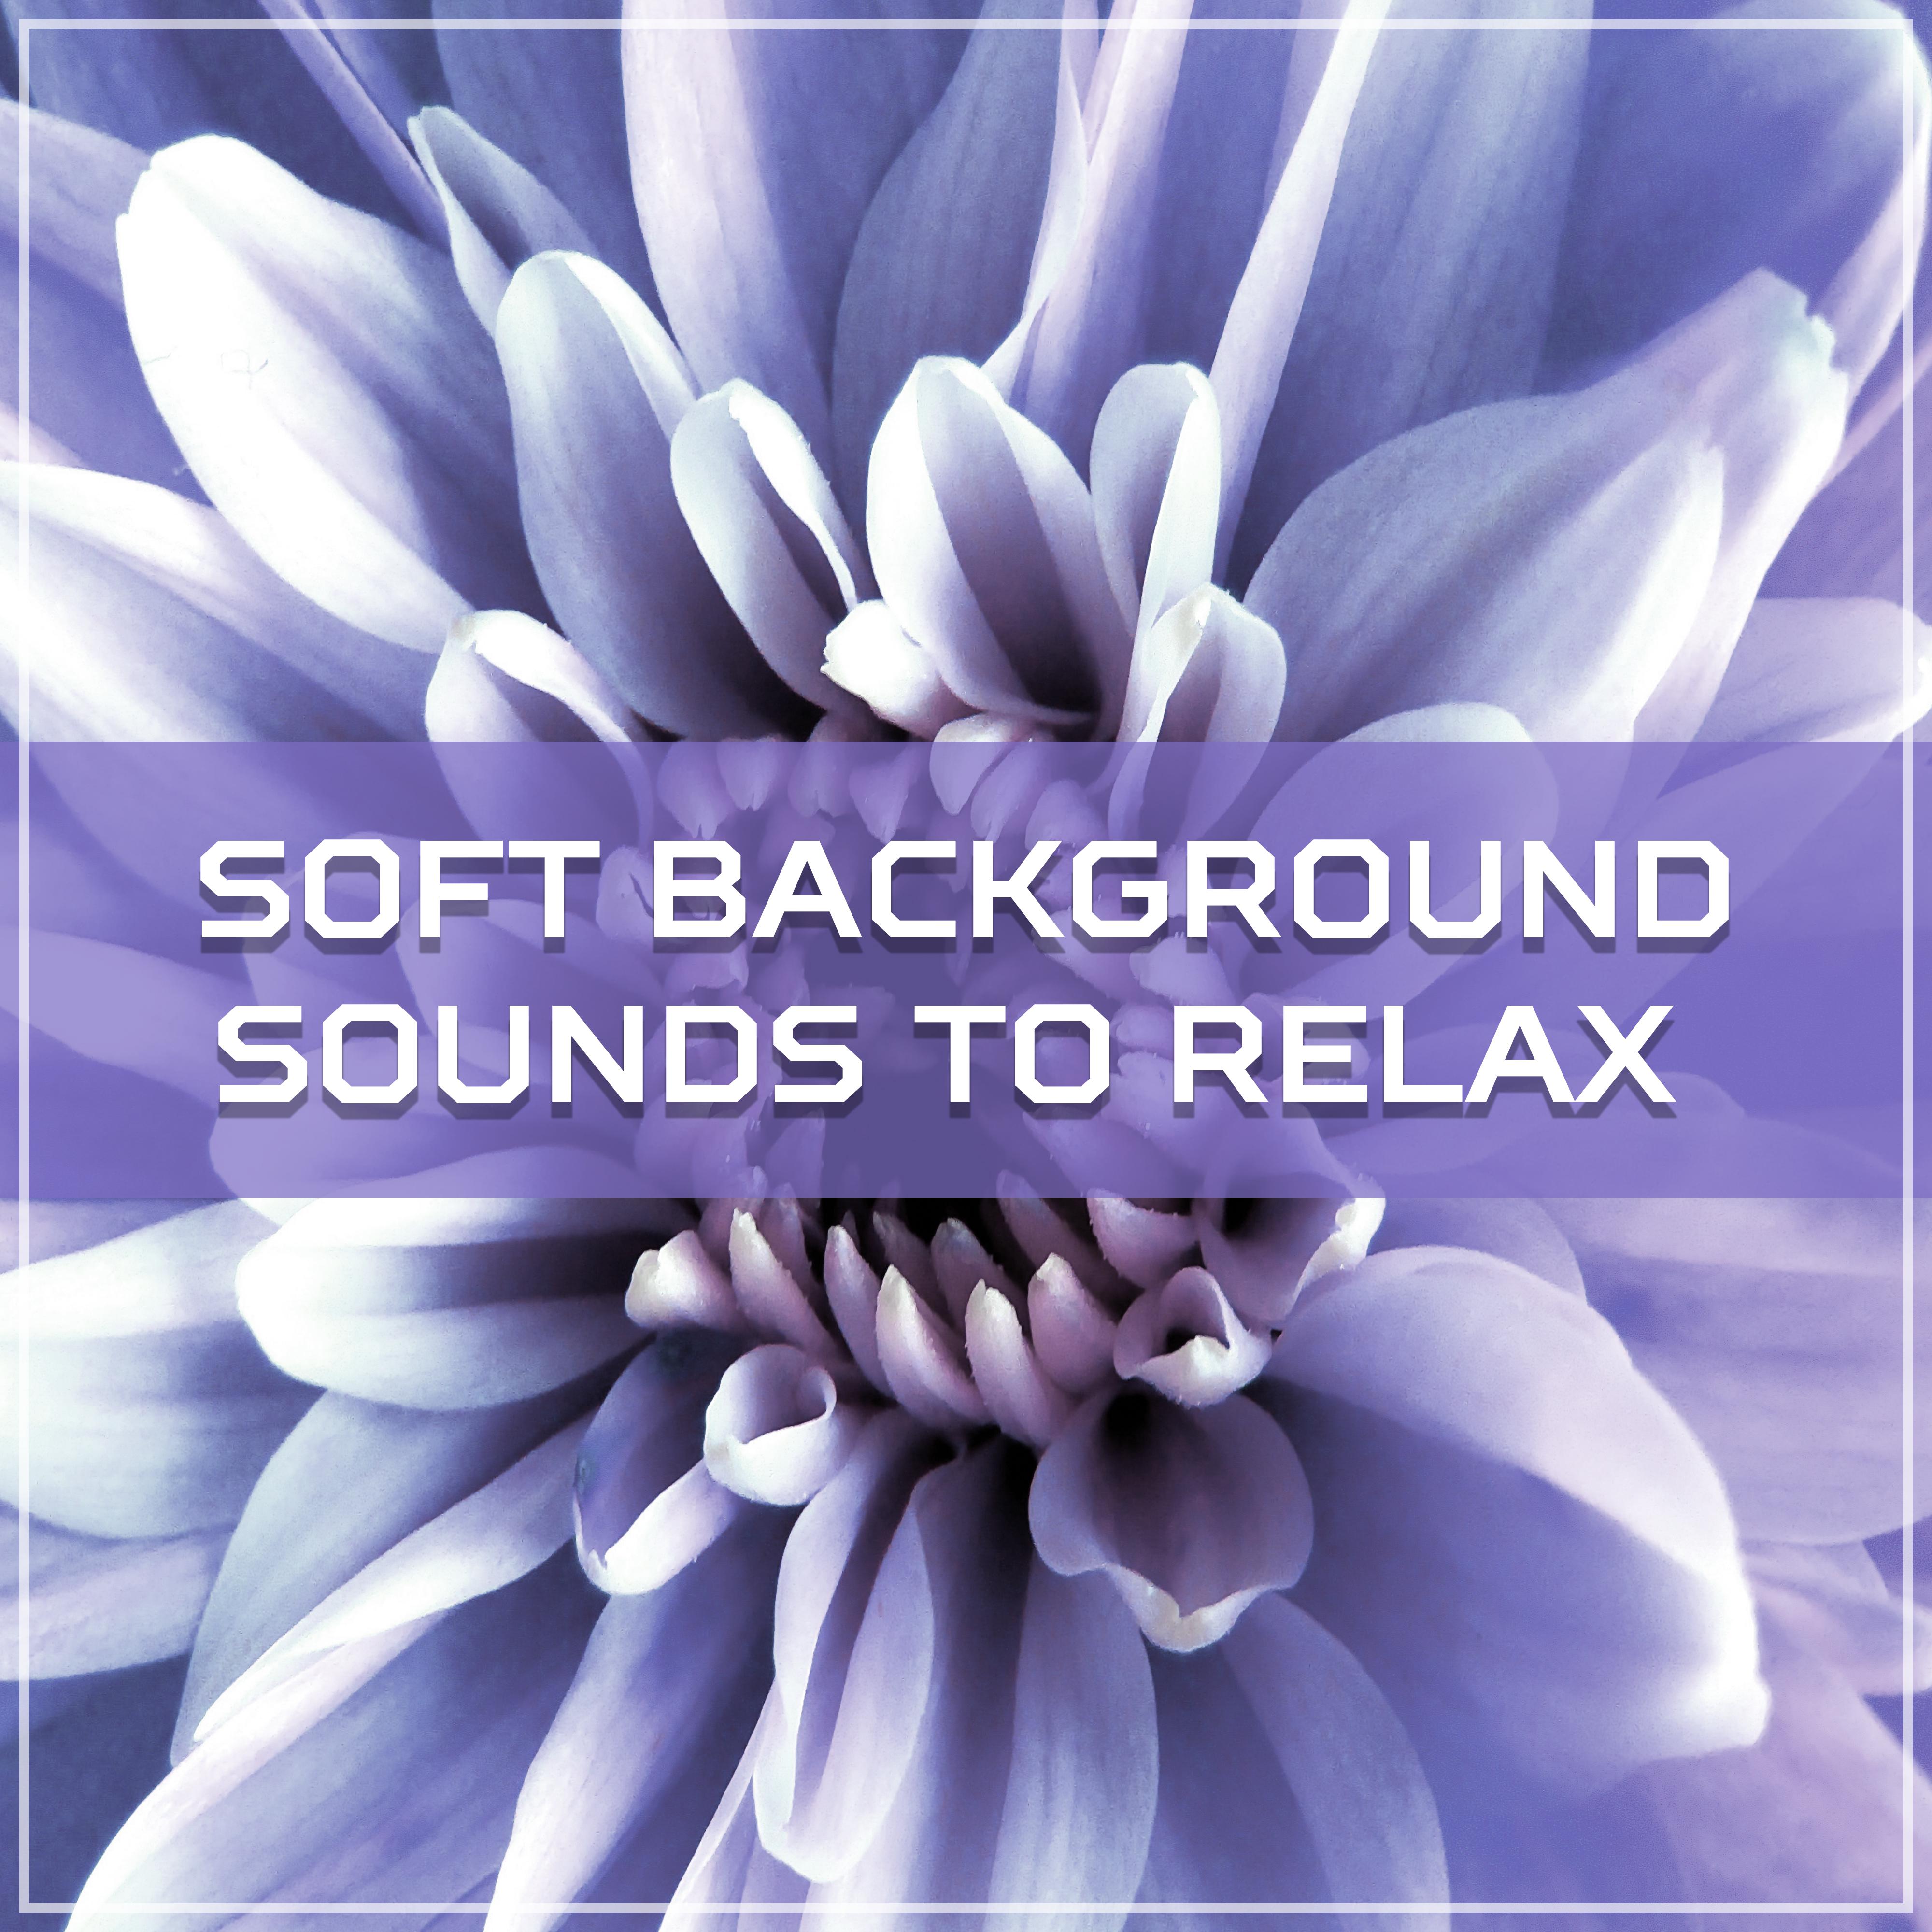 Soft Background Sounds to Relax  New Age Relaxation, Inner Harmony, Spirit Free, Stress Relief